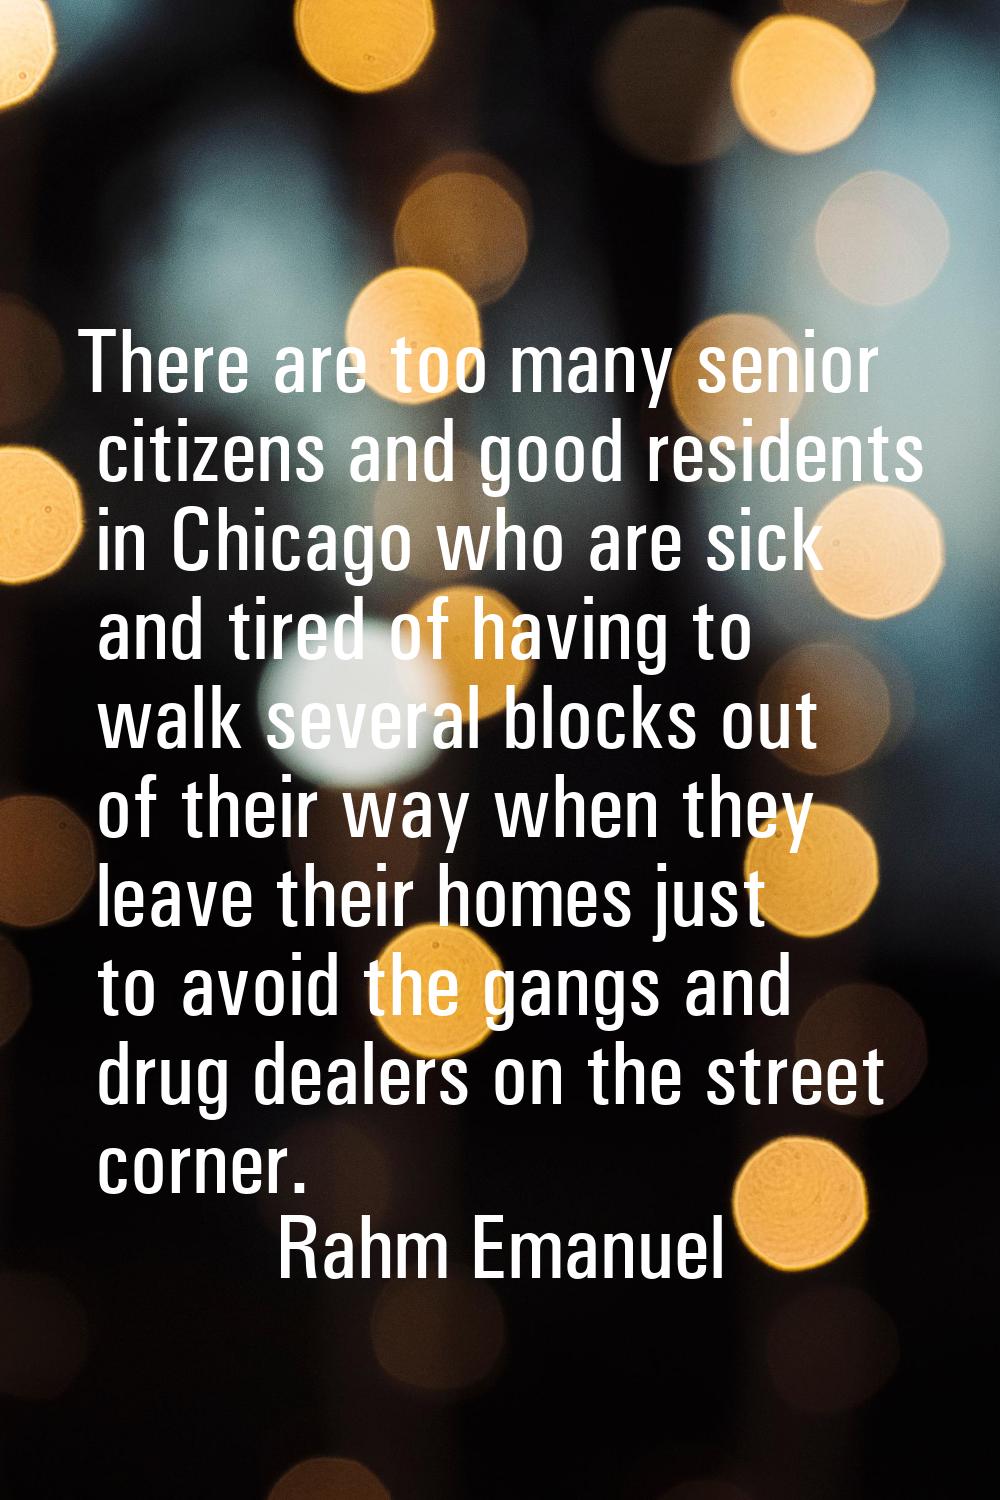 There are too many senior citizens and good residents in Chicago who are sick and tired of having t